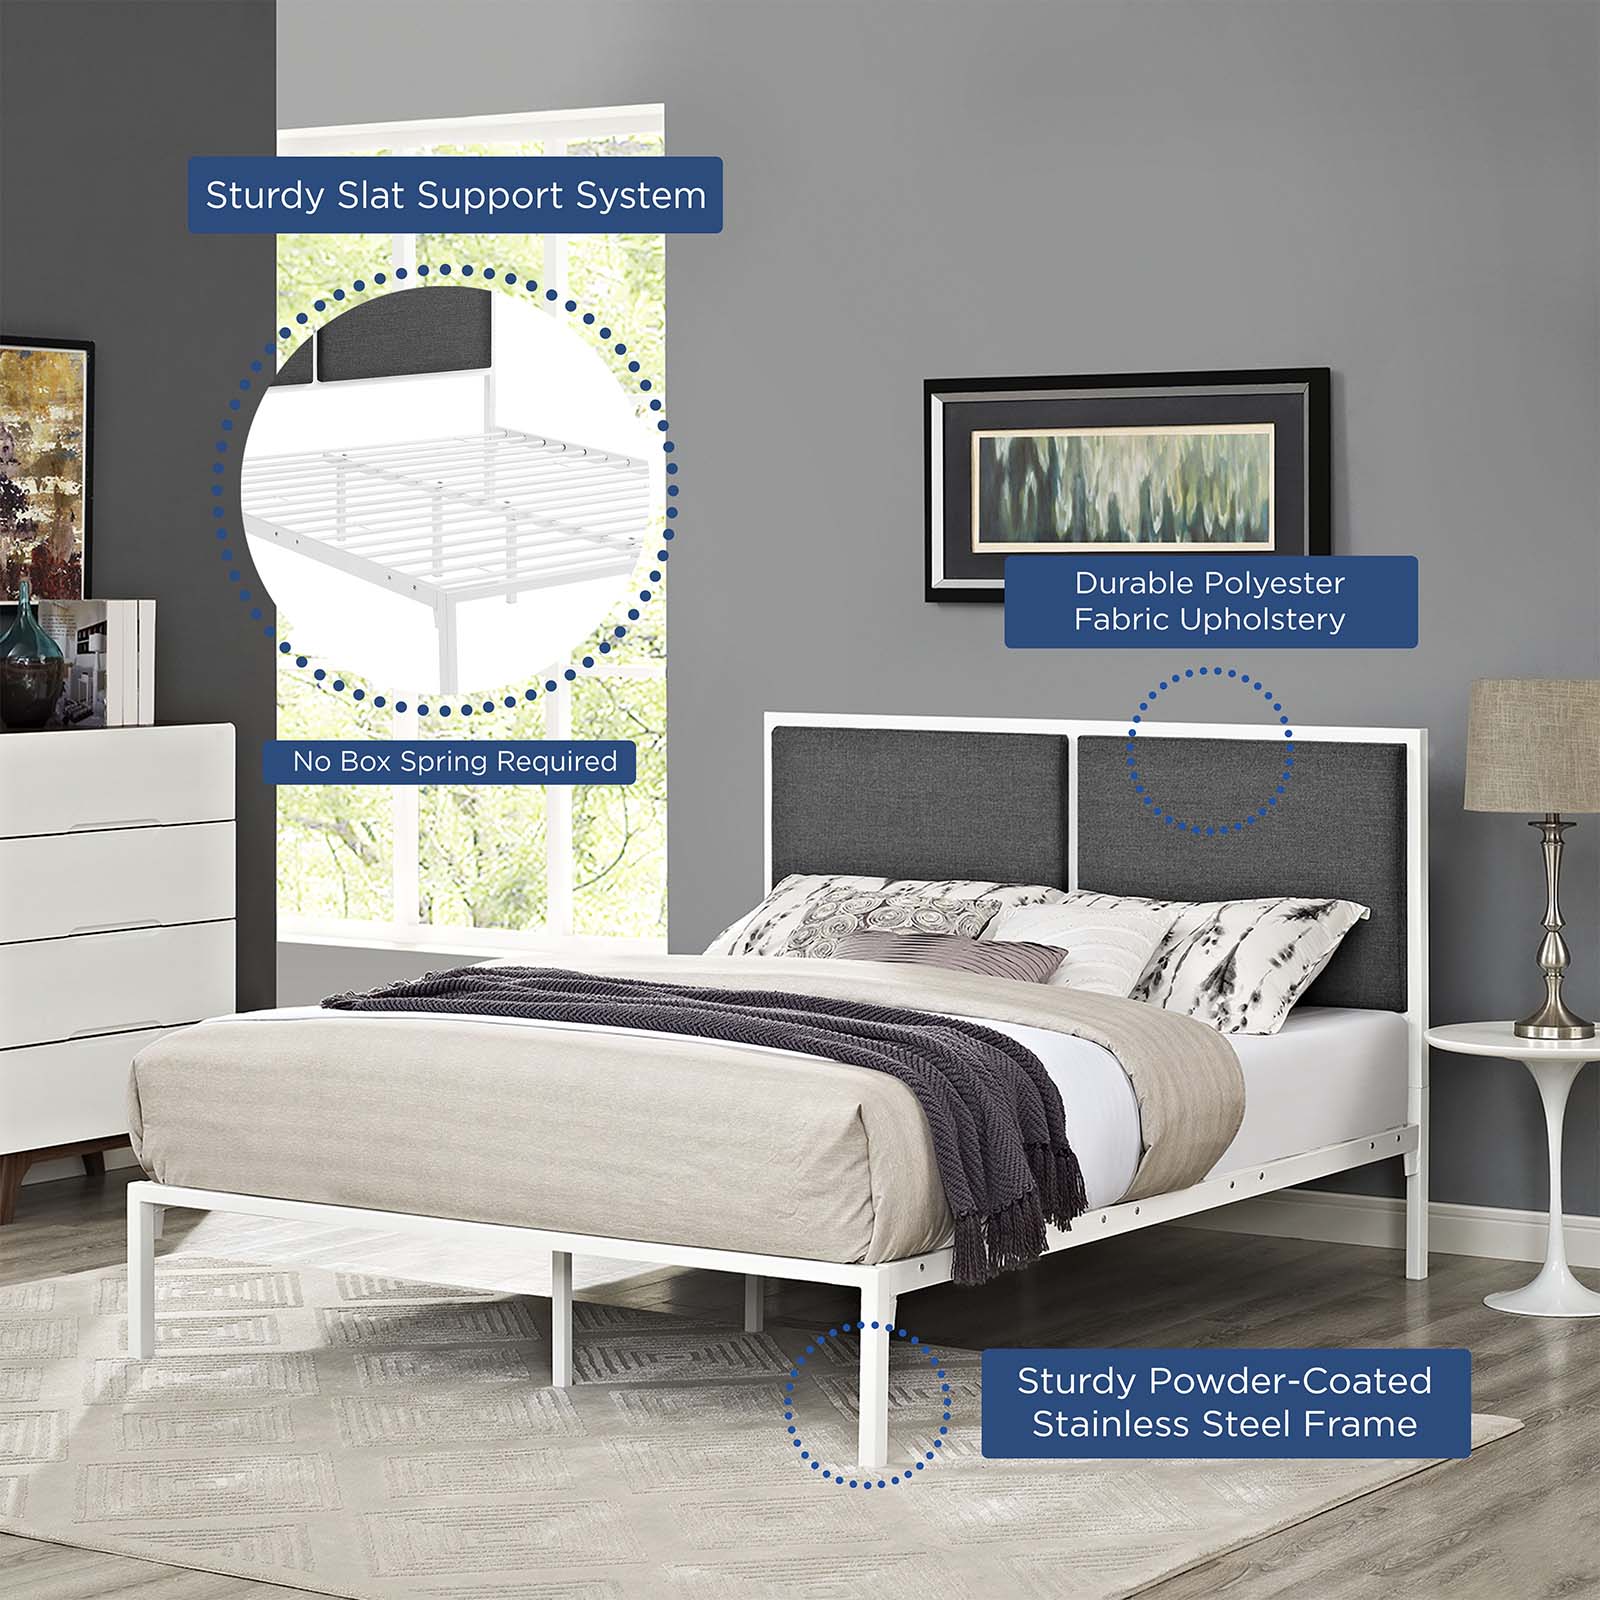 Della King Fabric Bed - East Shore Modern Home Furnishings